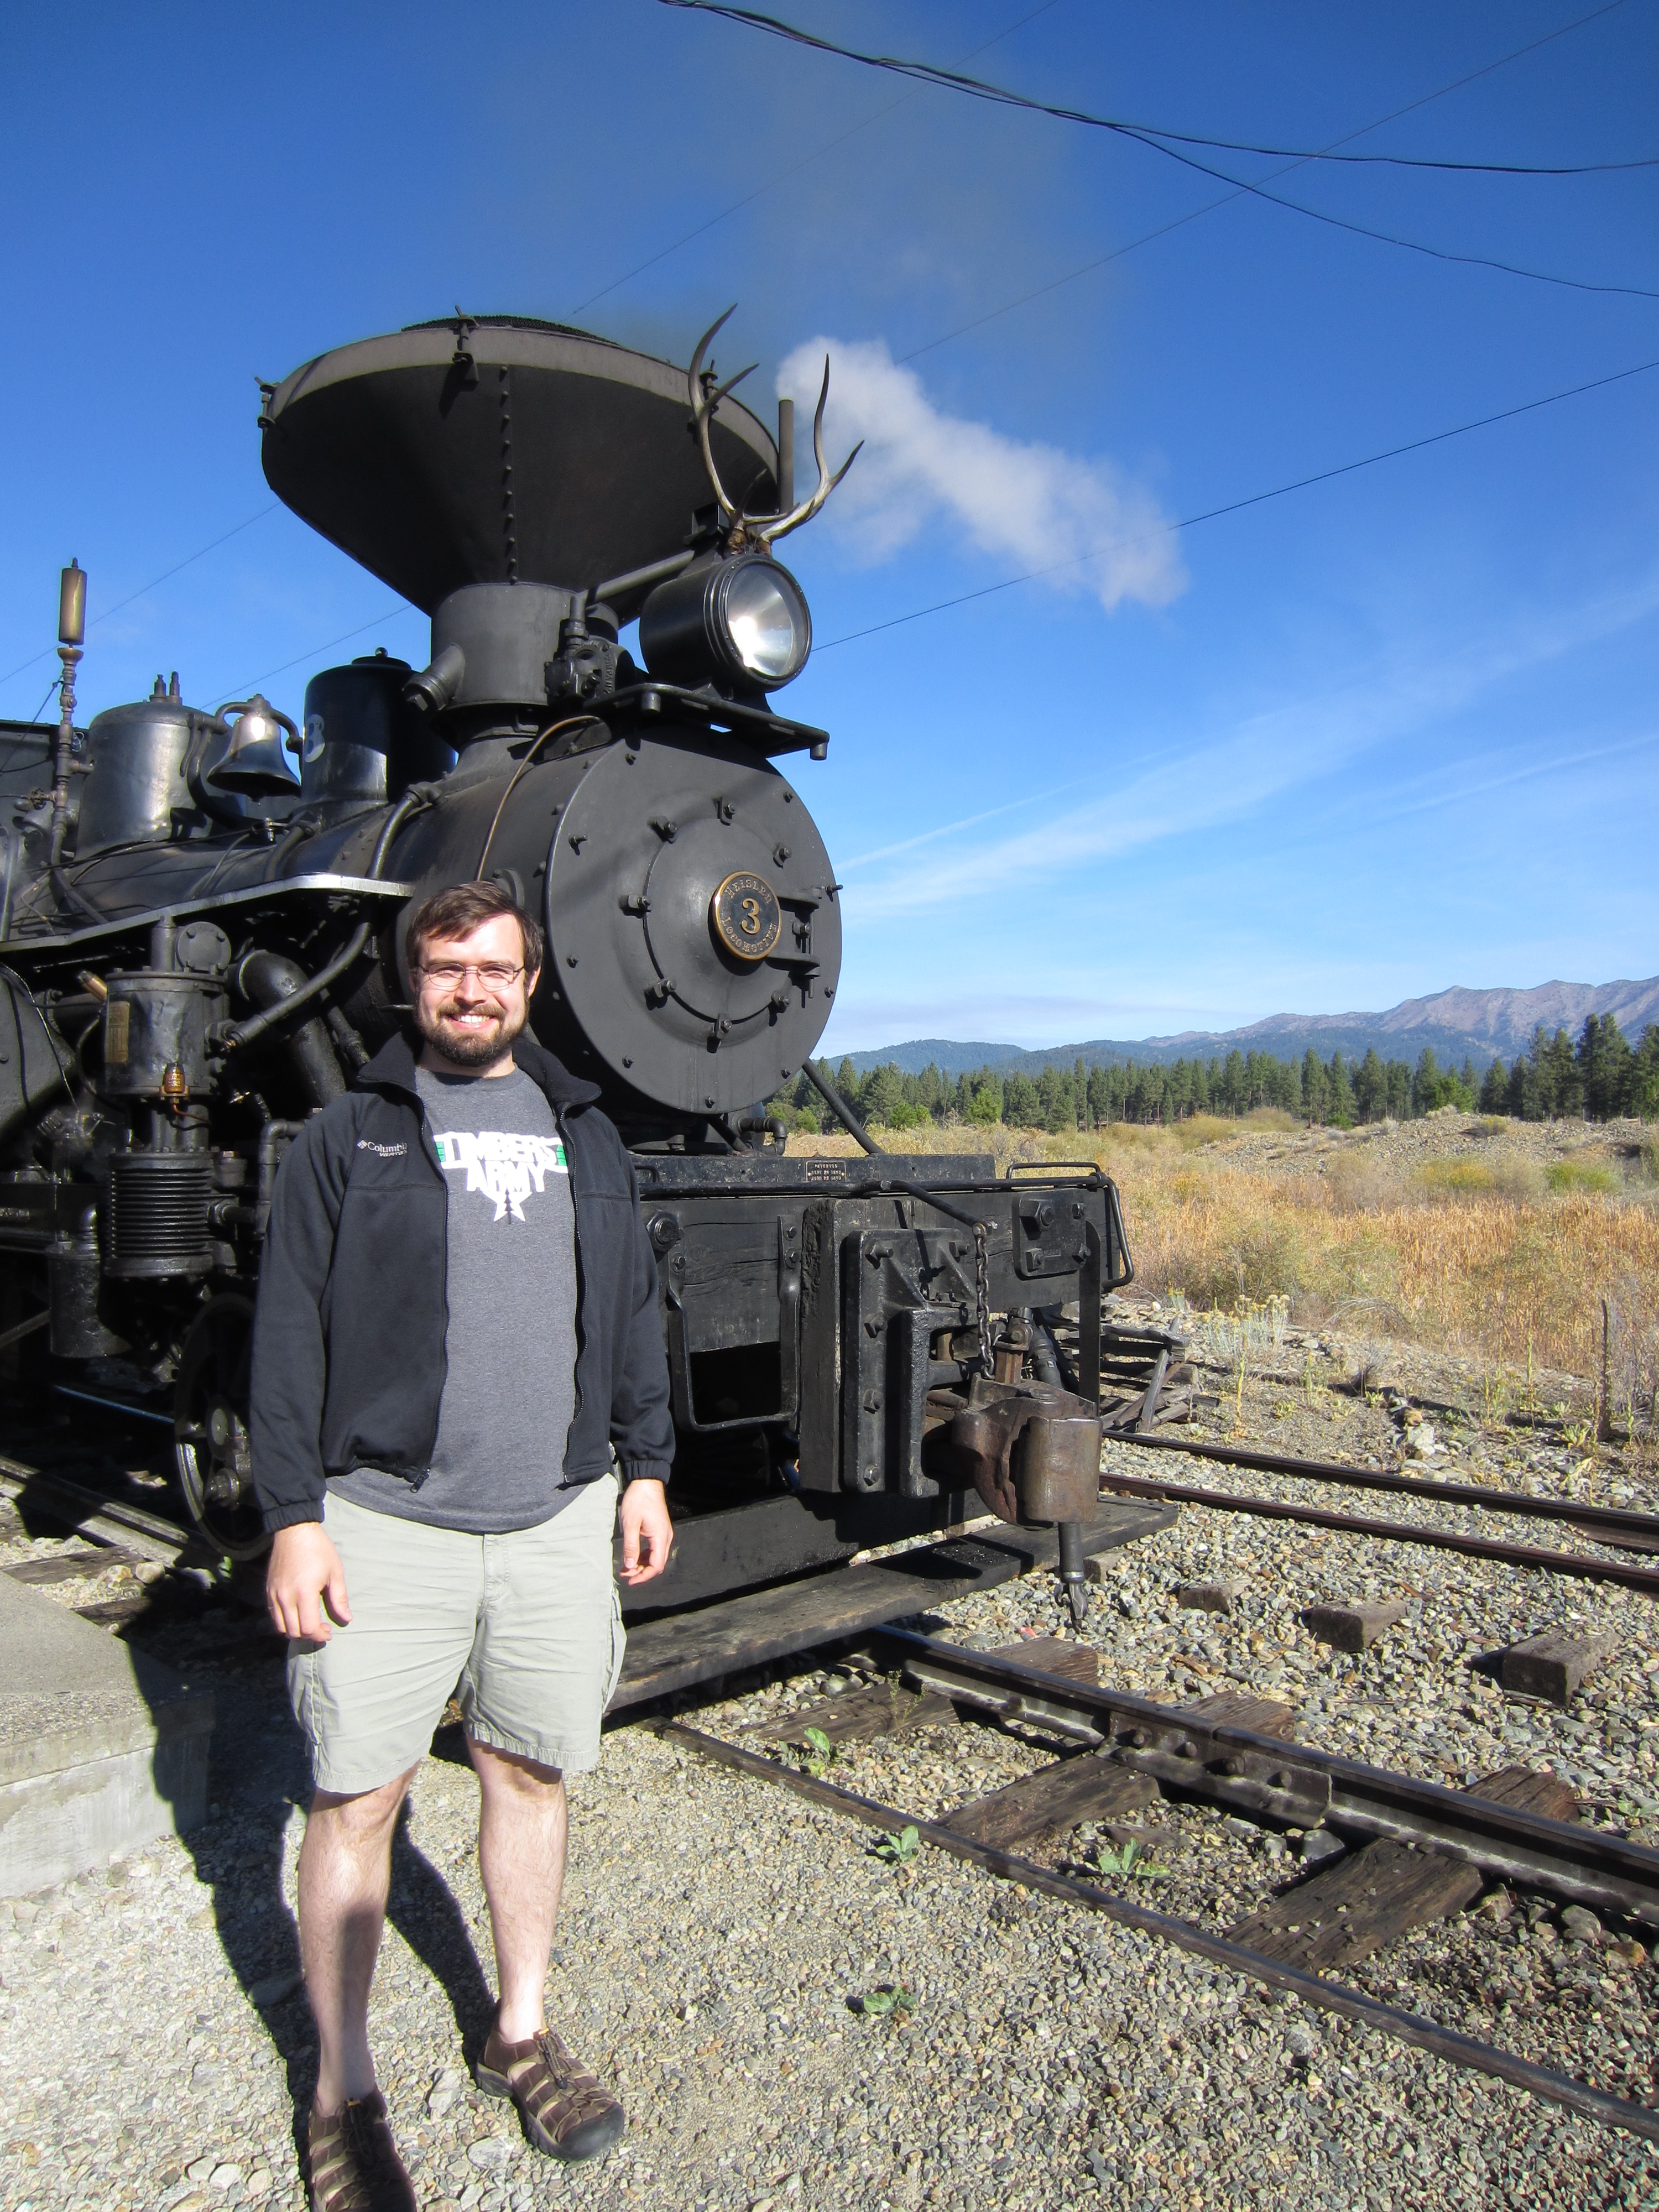 A Ride on the Sumpter Valley Railroad – Not Your Average Engineer